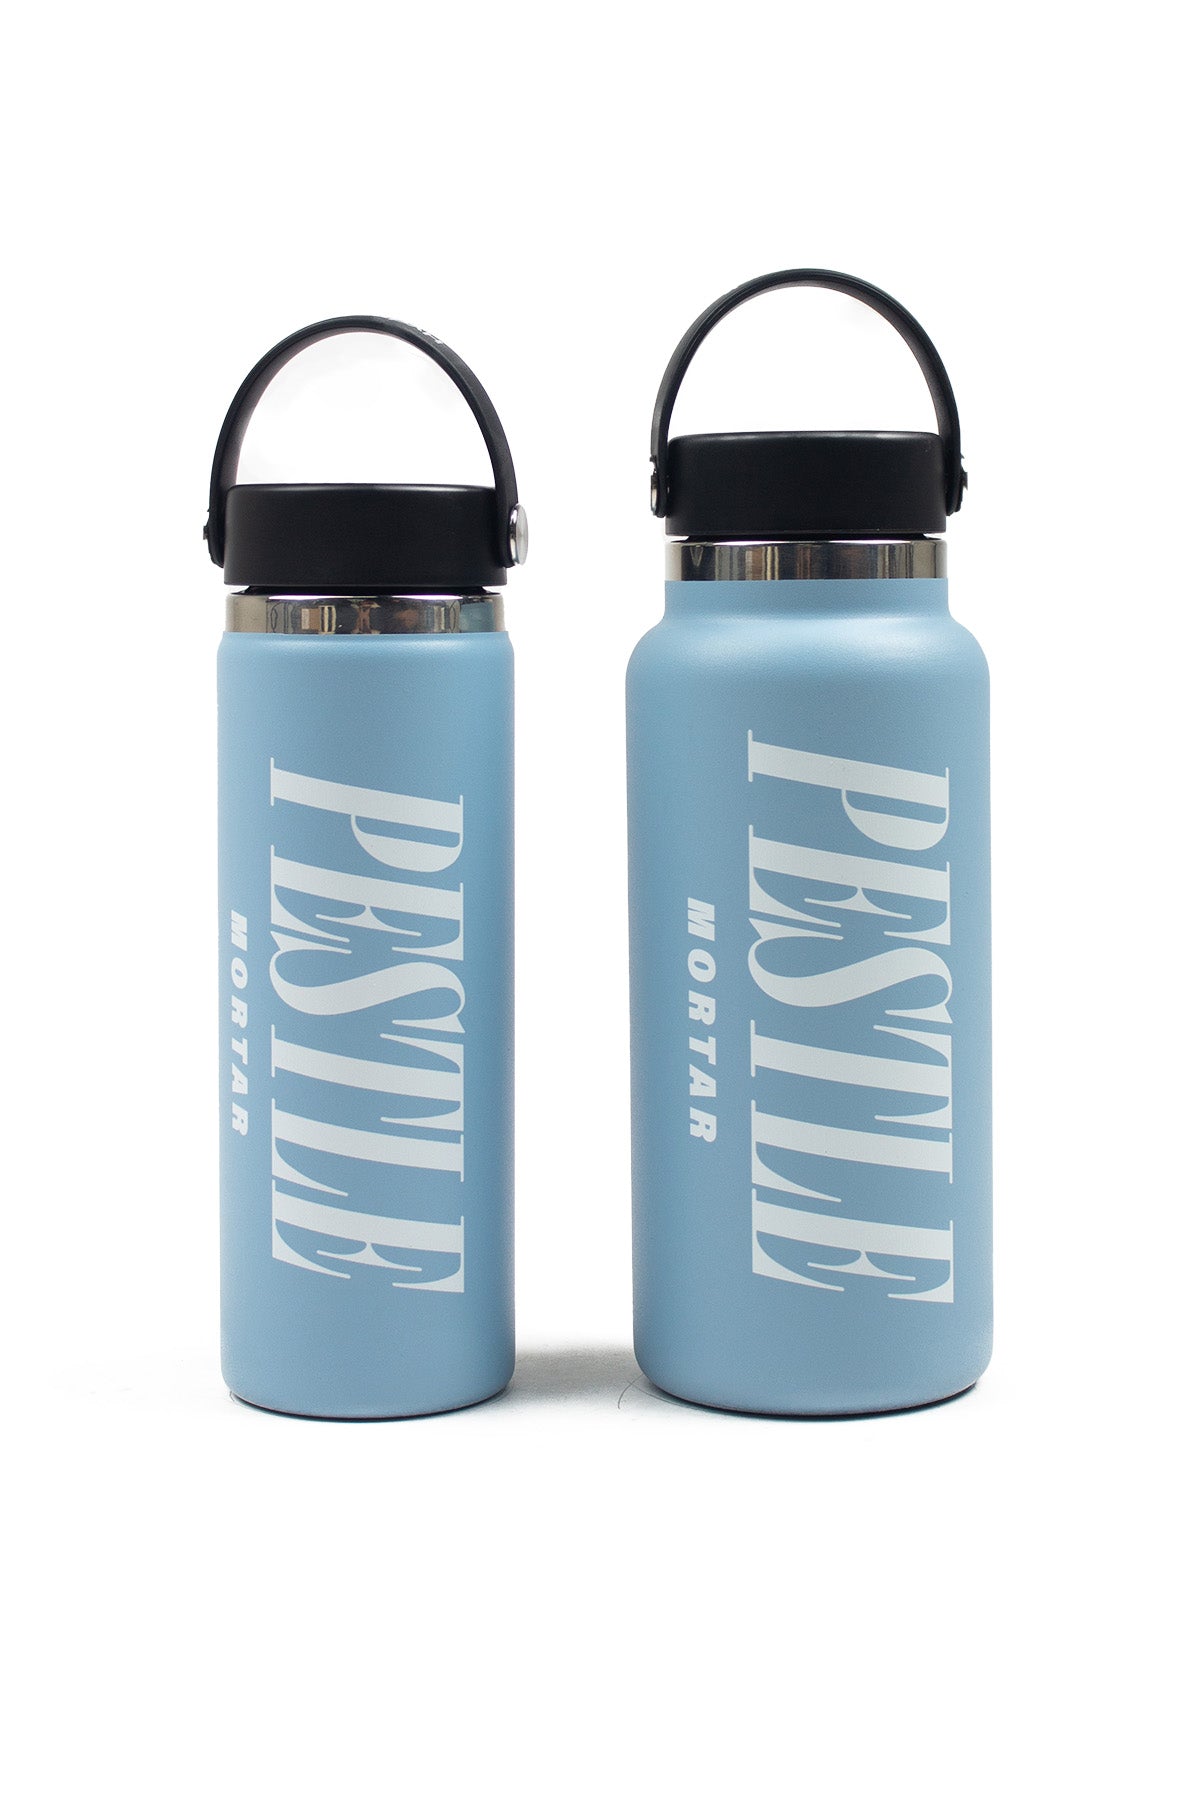 PMC X Hydro Flask Wide Mouth 2.0 Rain